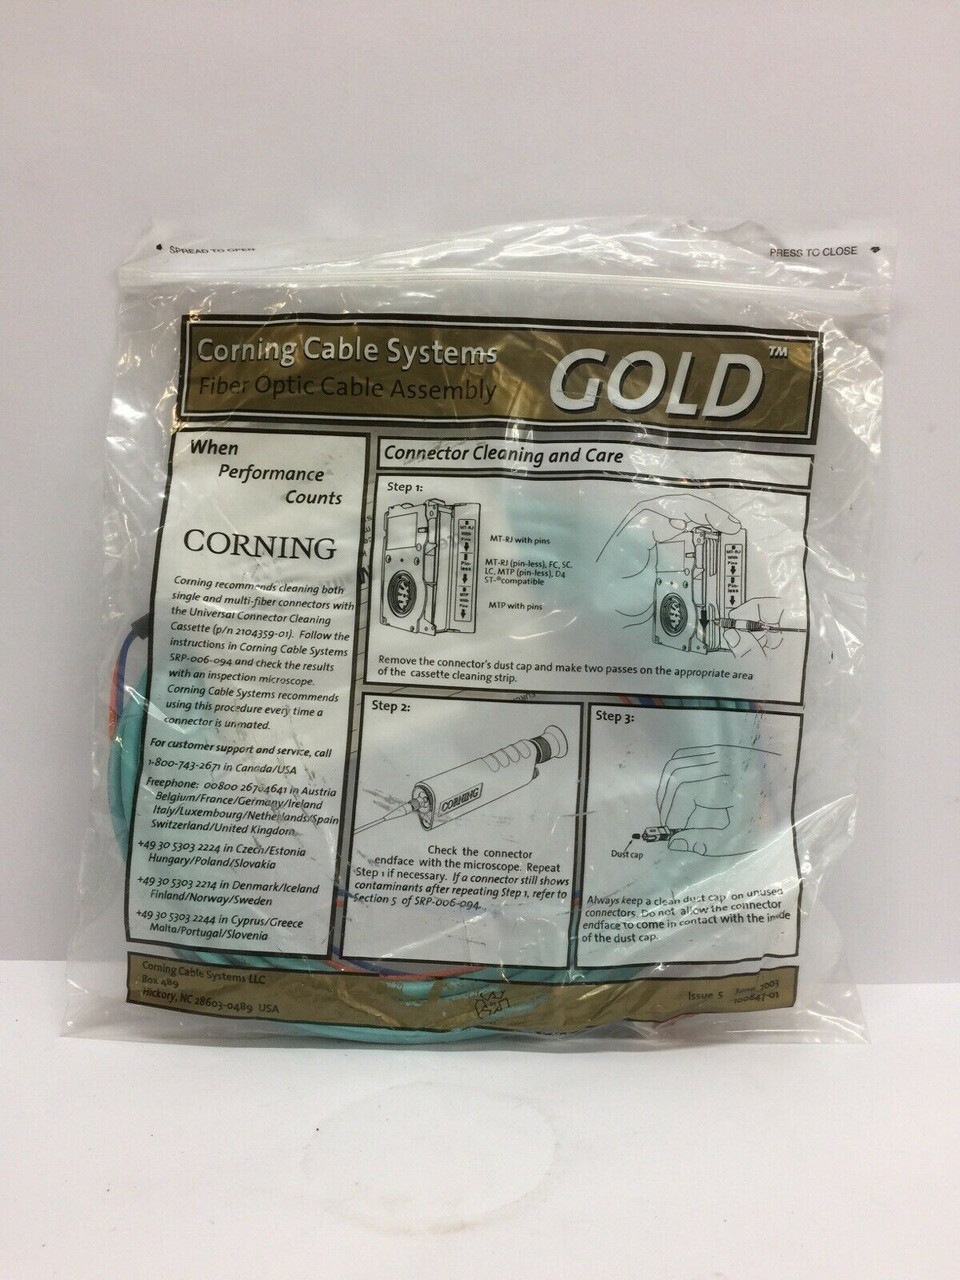 7M Fiber Optic Cable Assembly GOLD 664203 Corning Cable Systems